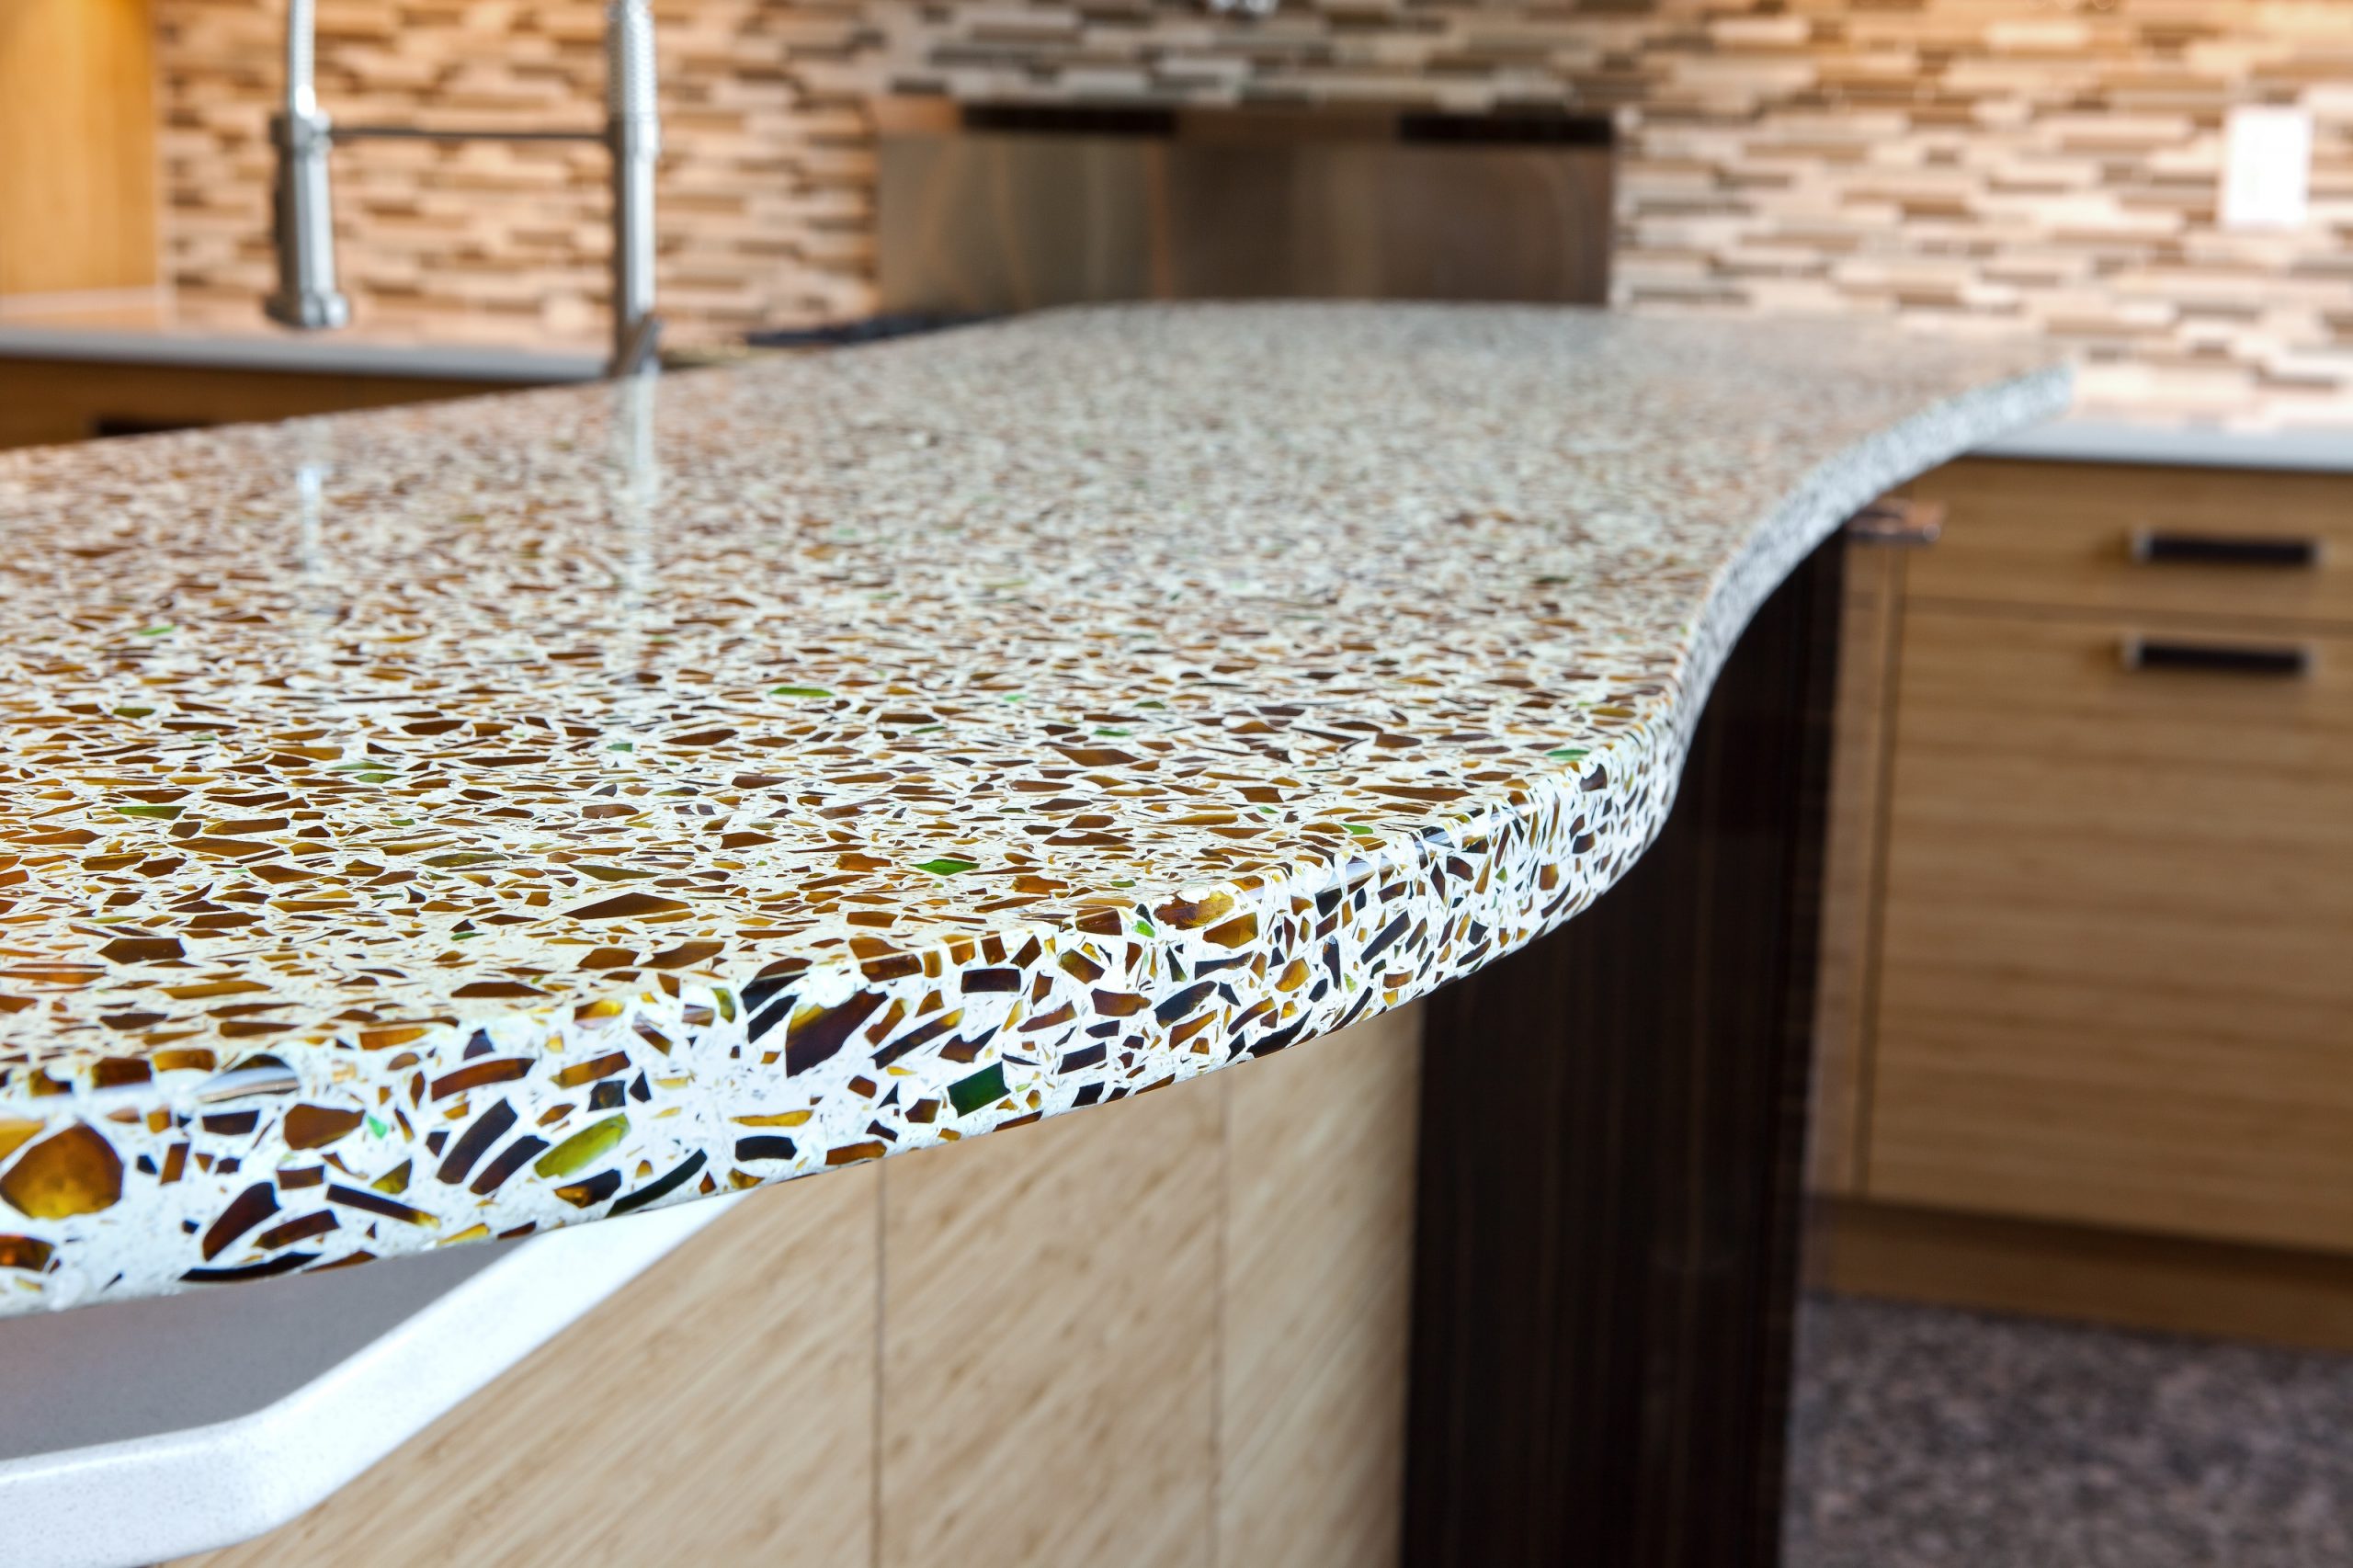 How To Make Recycled Glass Countertops, What Is Recycled Glass Countertops